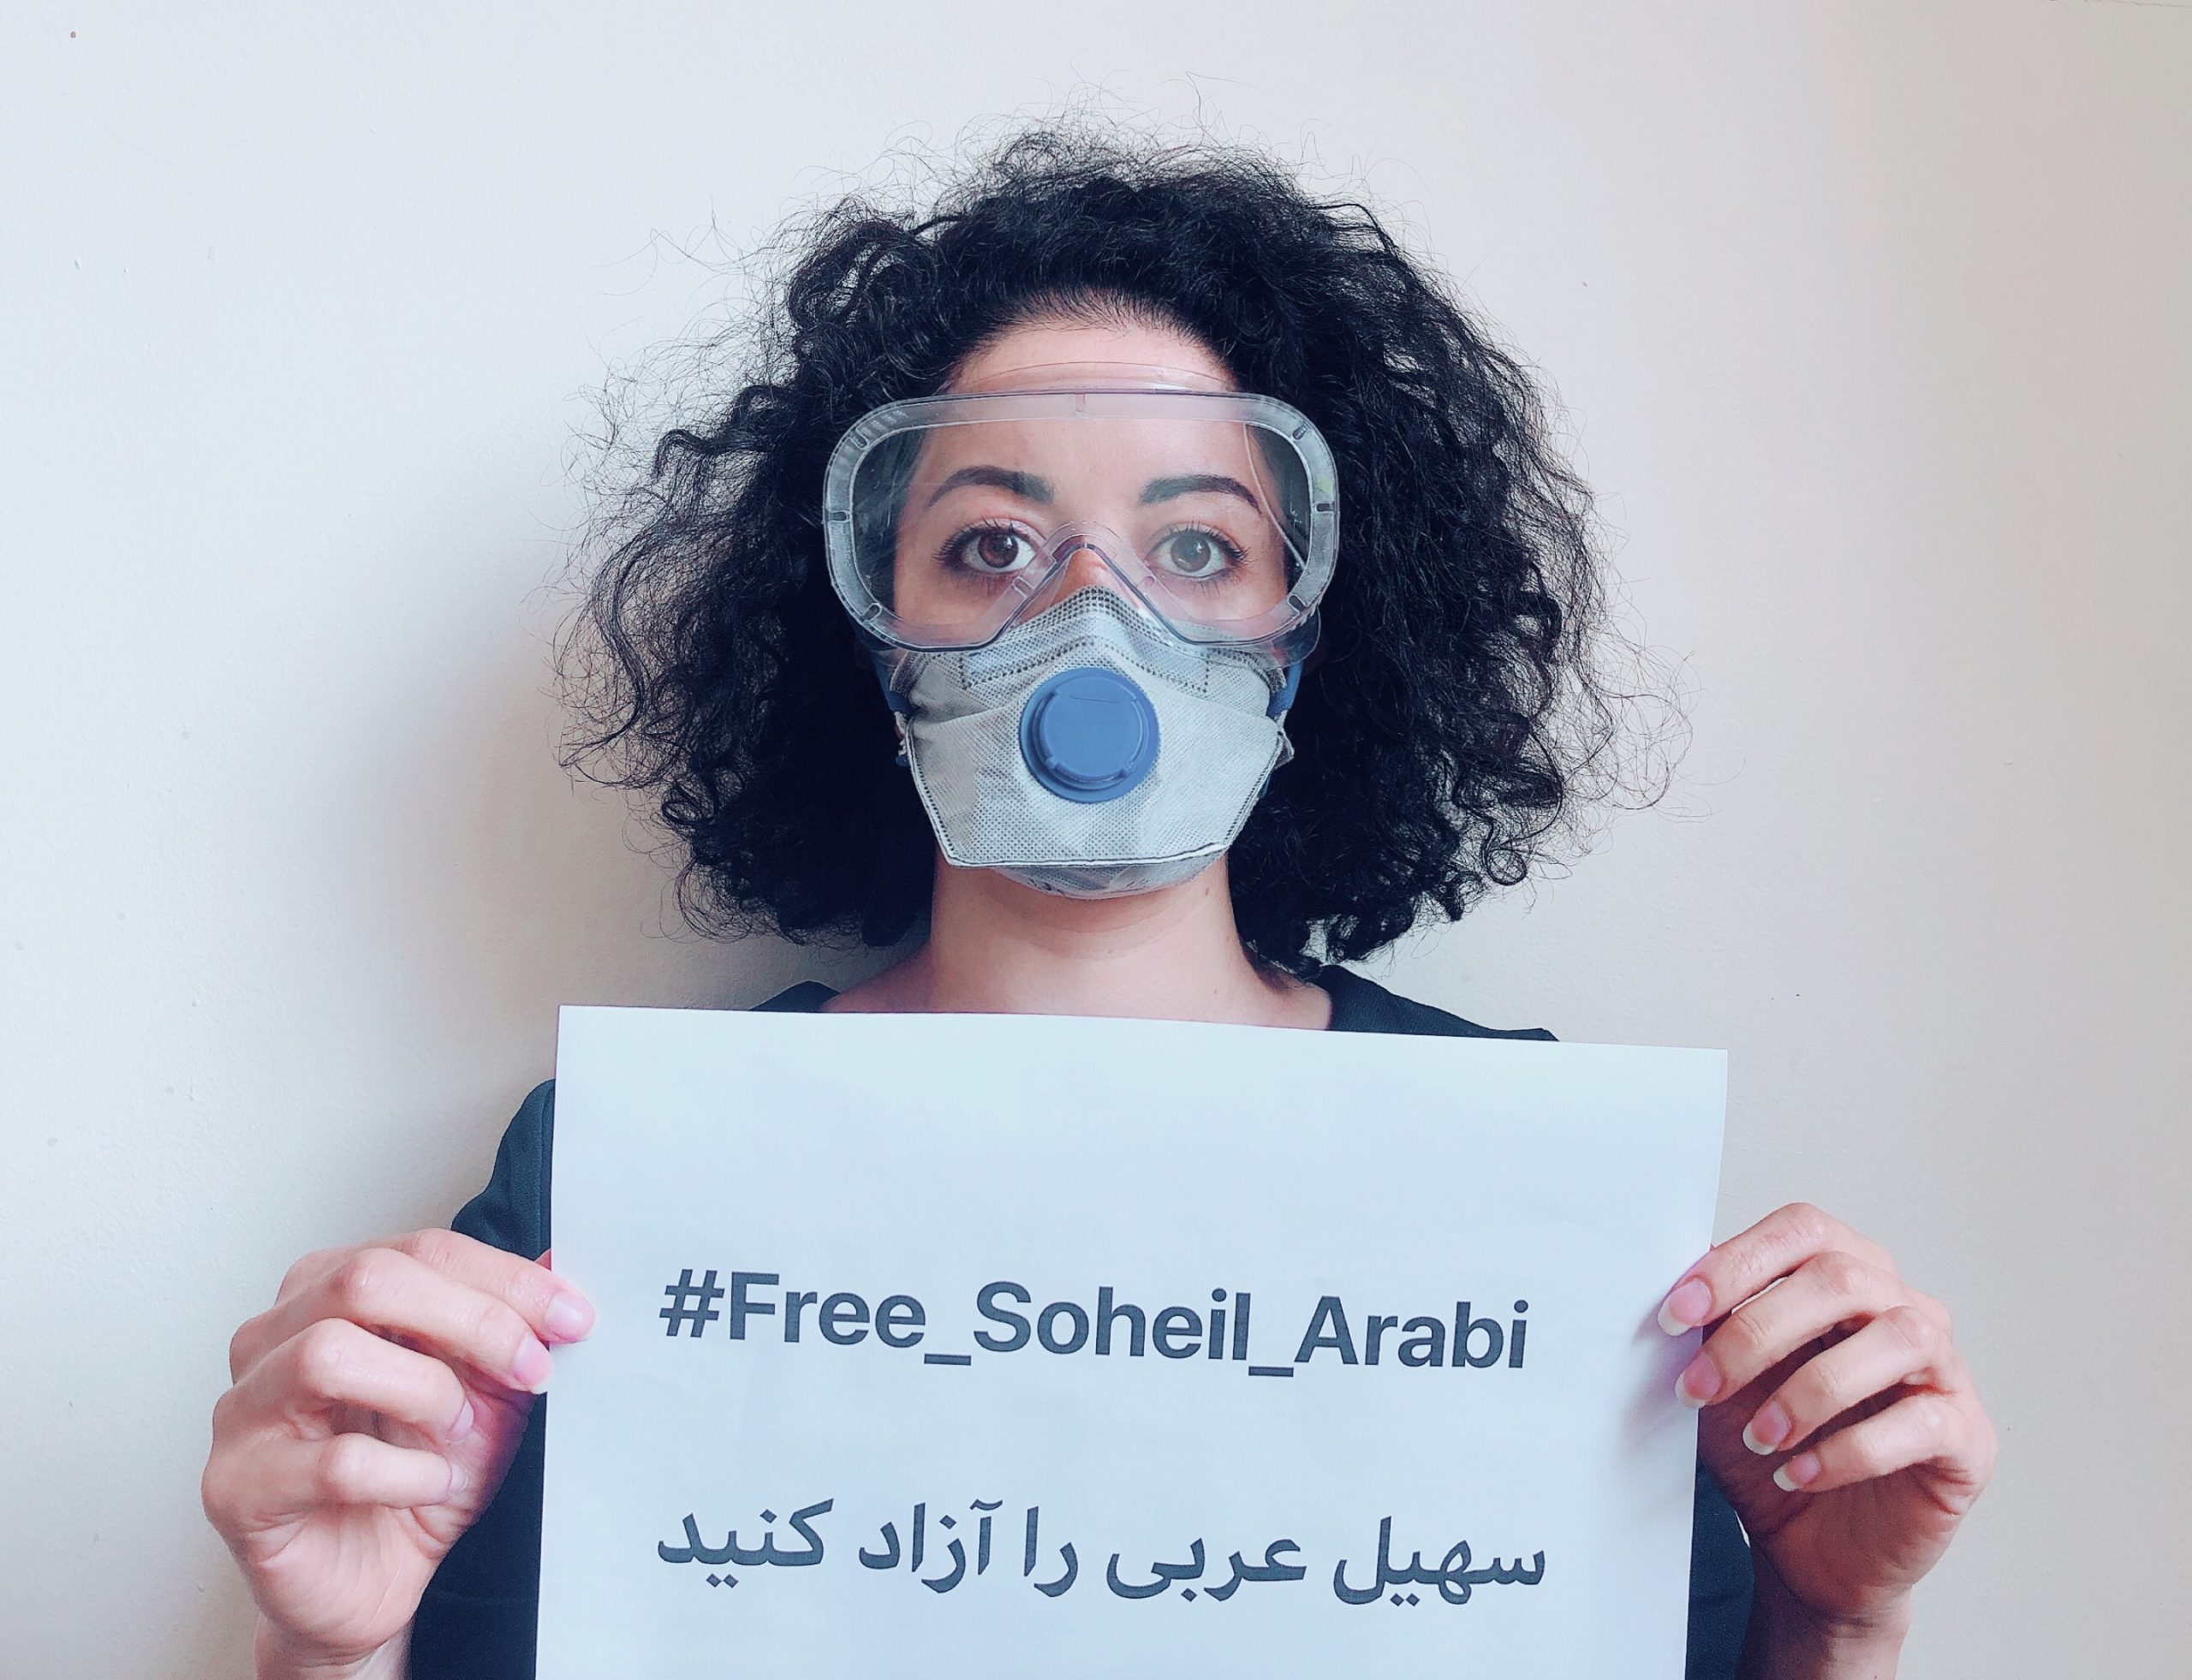 First Online Protest to Save the Life of Soheil Arabi